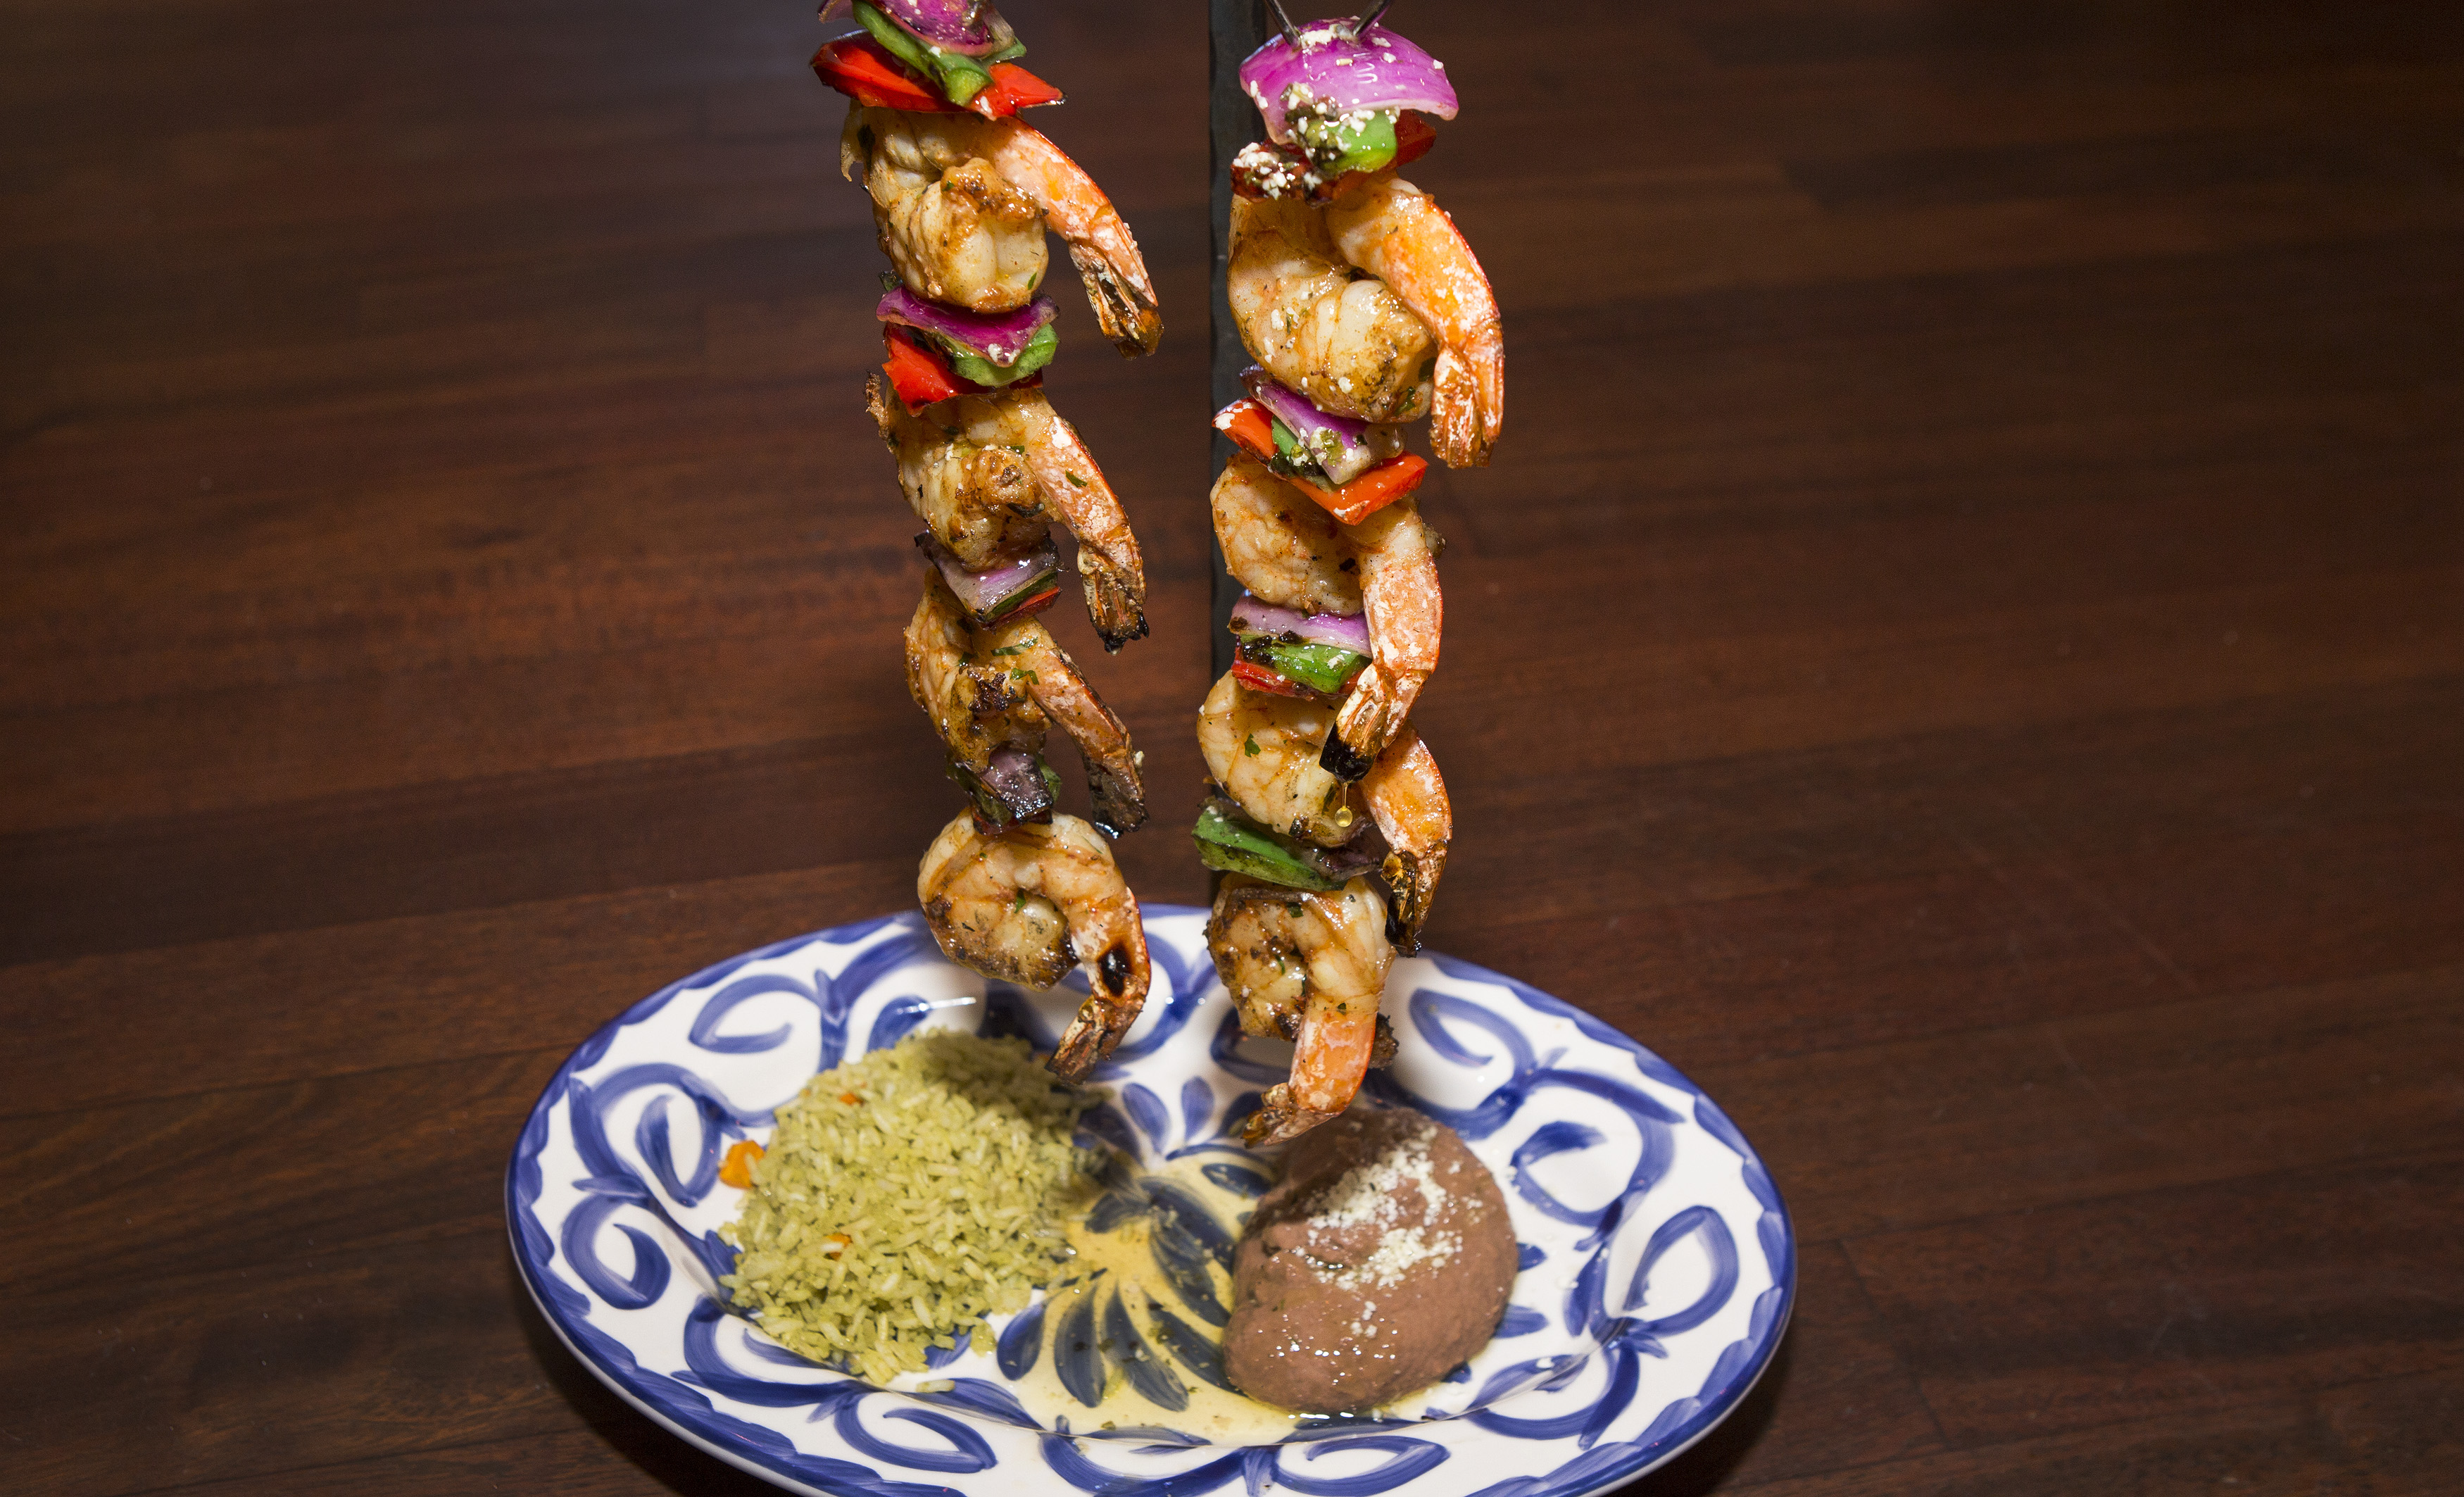 Two skewers of shrimp, onion, red, and green peppers hang on a metal stand over a blue and white plate that contains Mexican rice and refried beans.